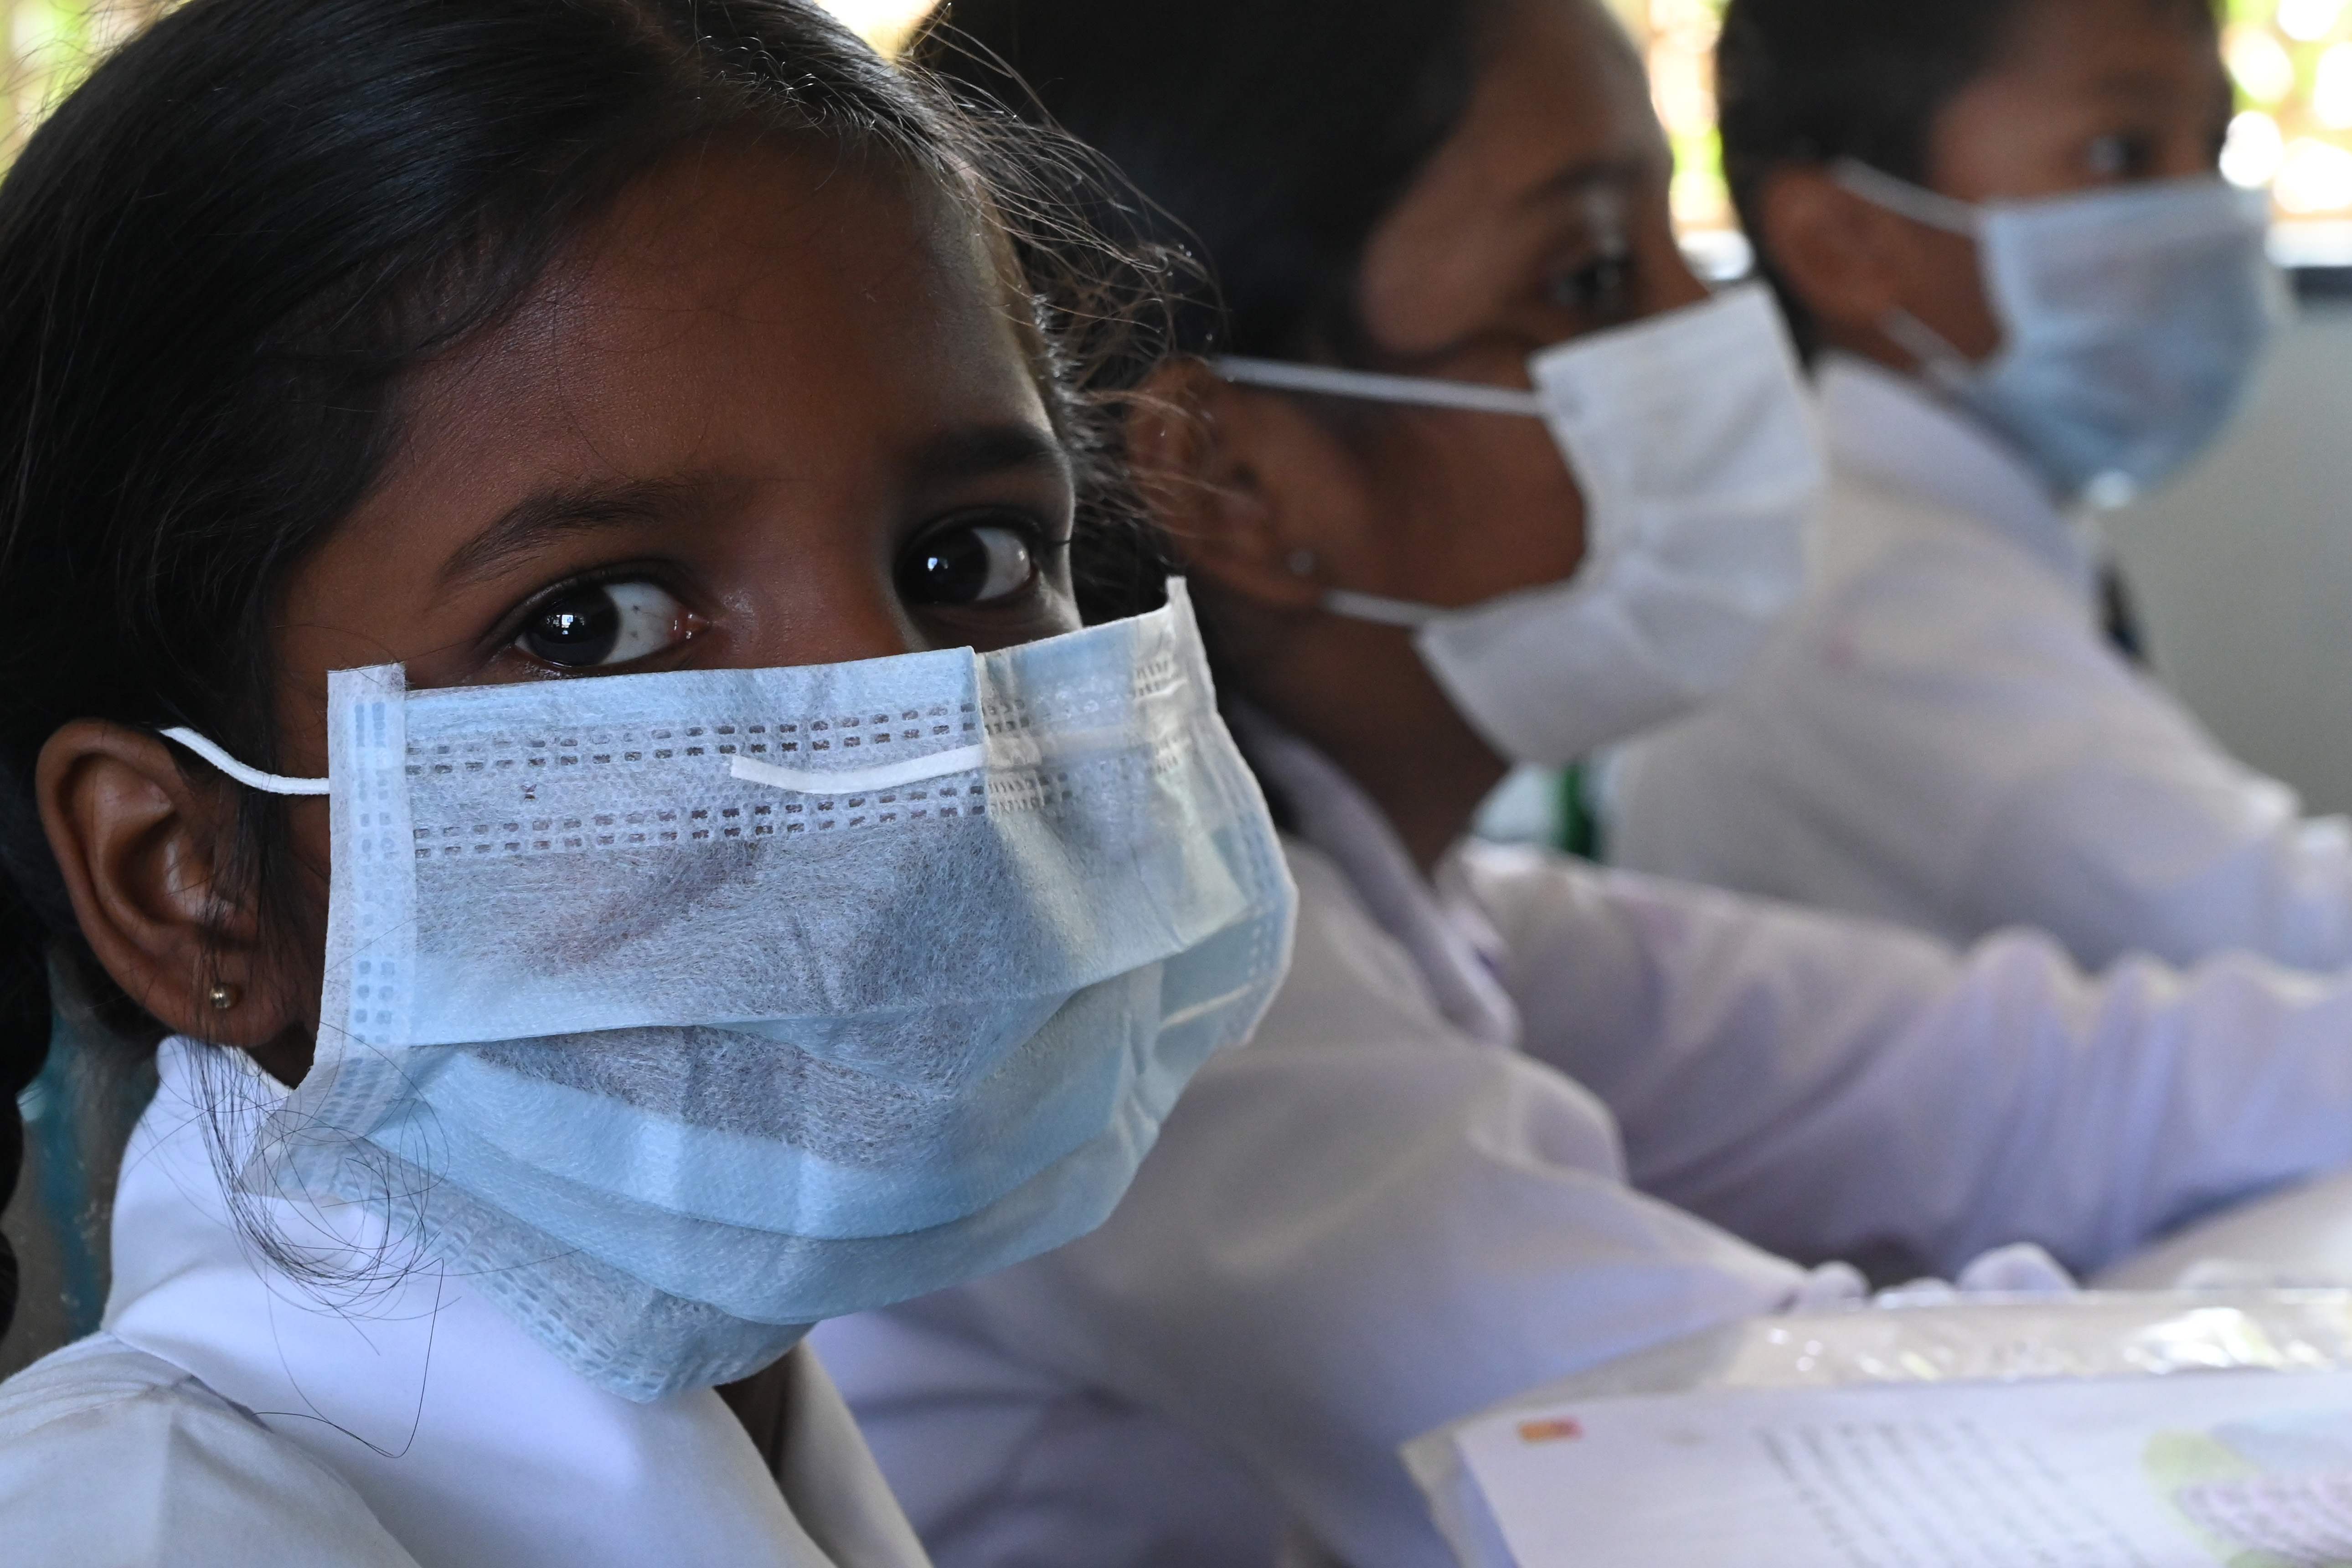 Sri Lanka’s schoolgirls look on as they sit in a classroom wearing facemasks